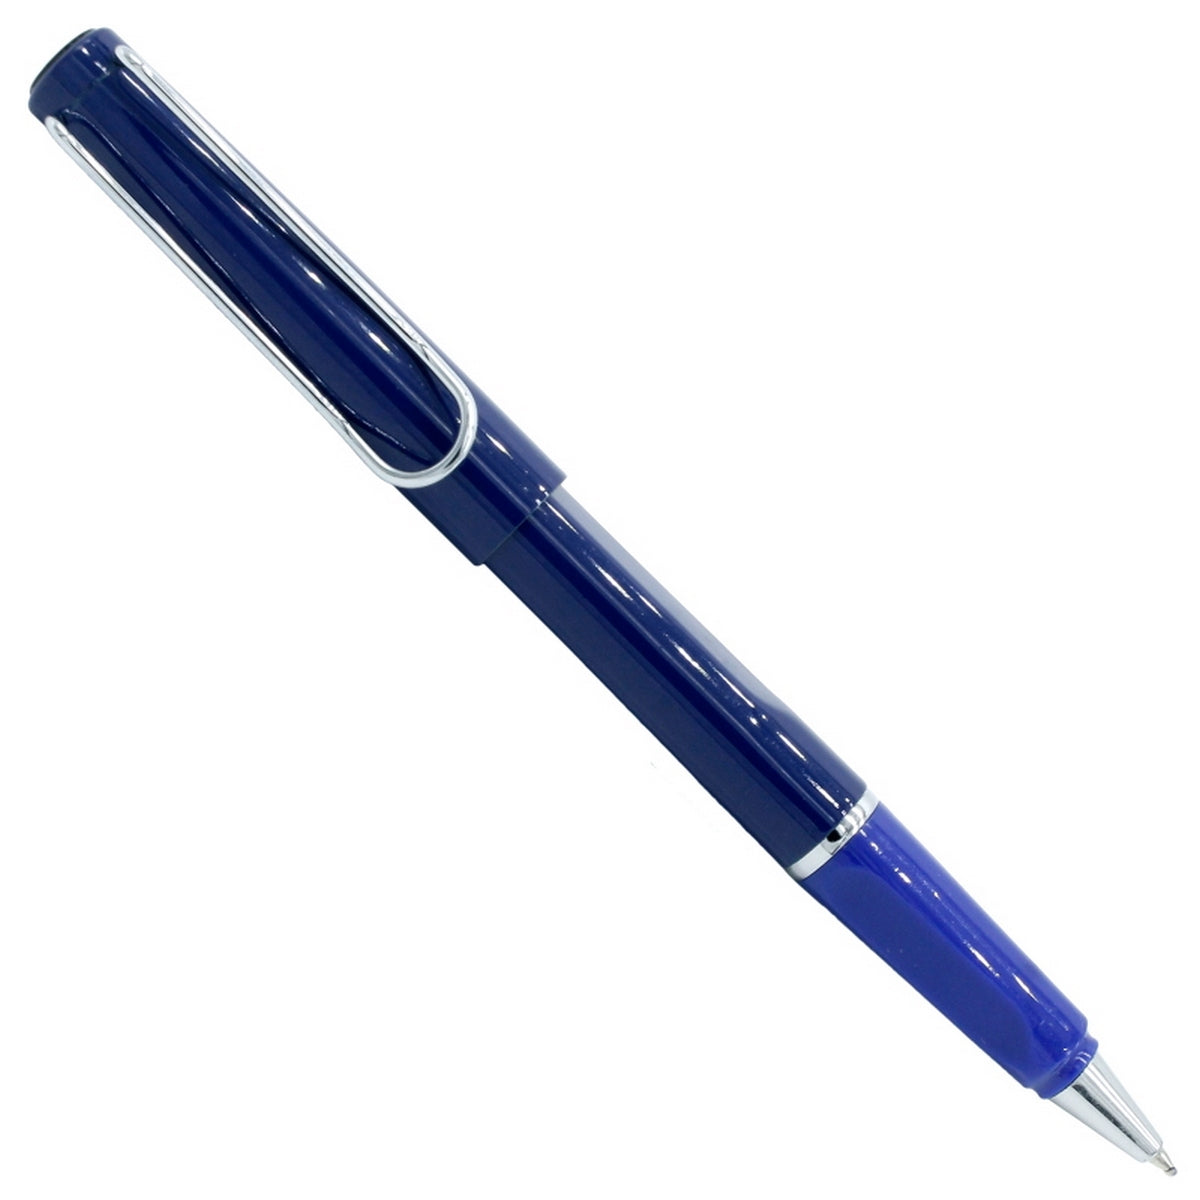 Navy Blue Color Roller Ball Pen - For Office, College, Personal Use